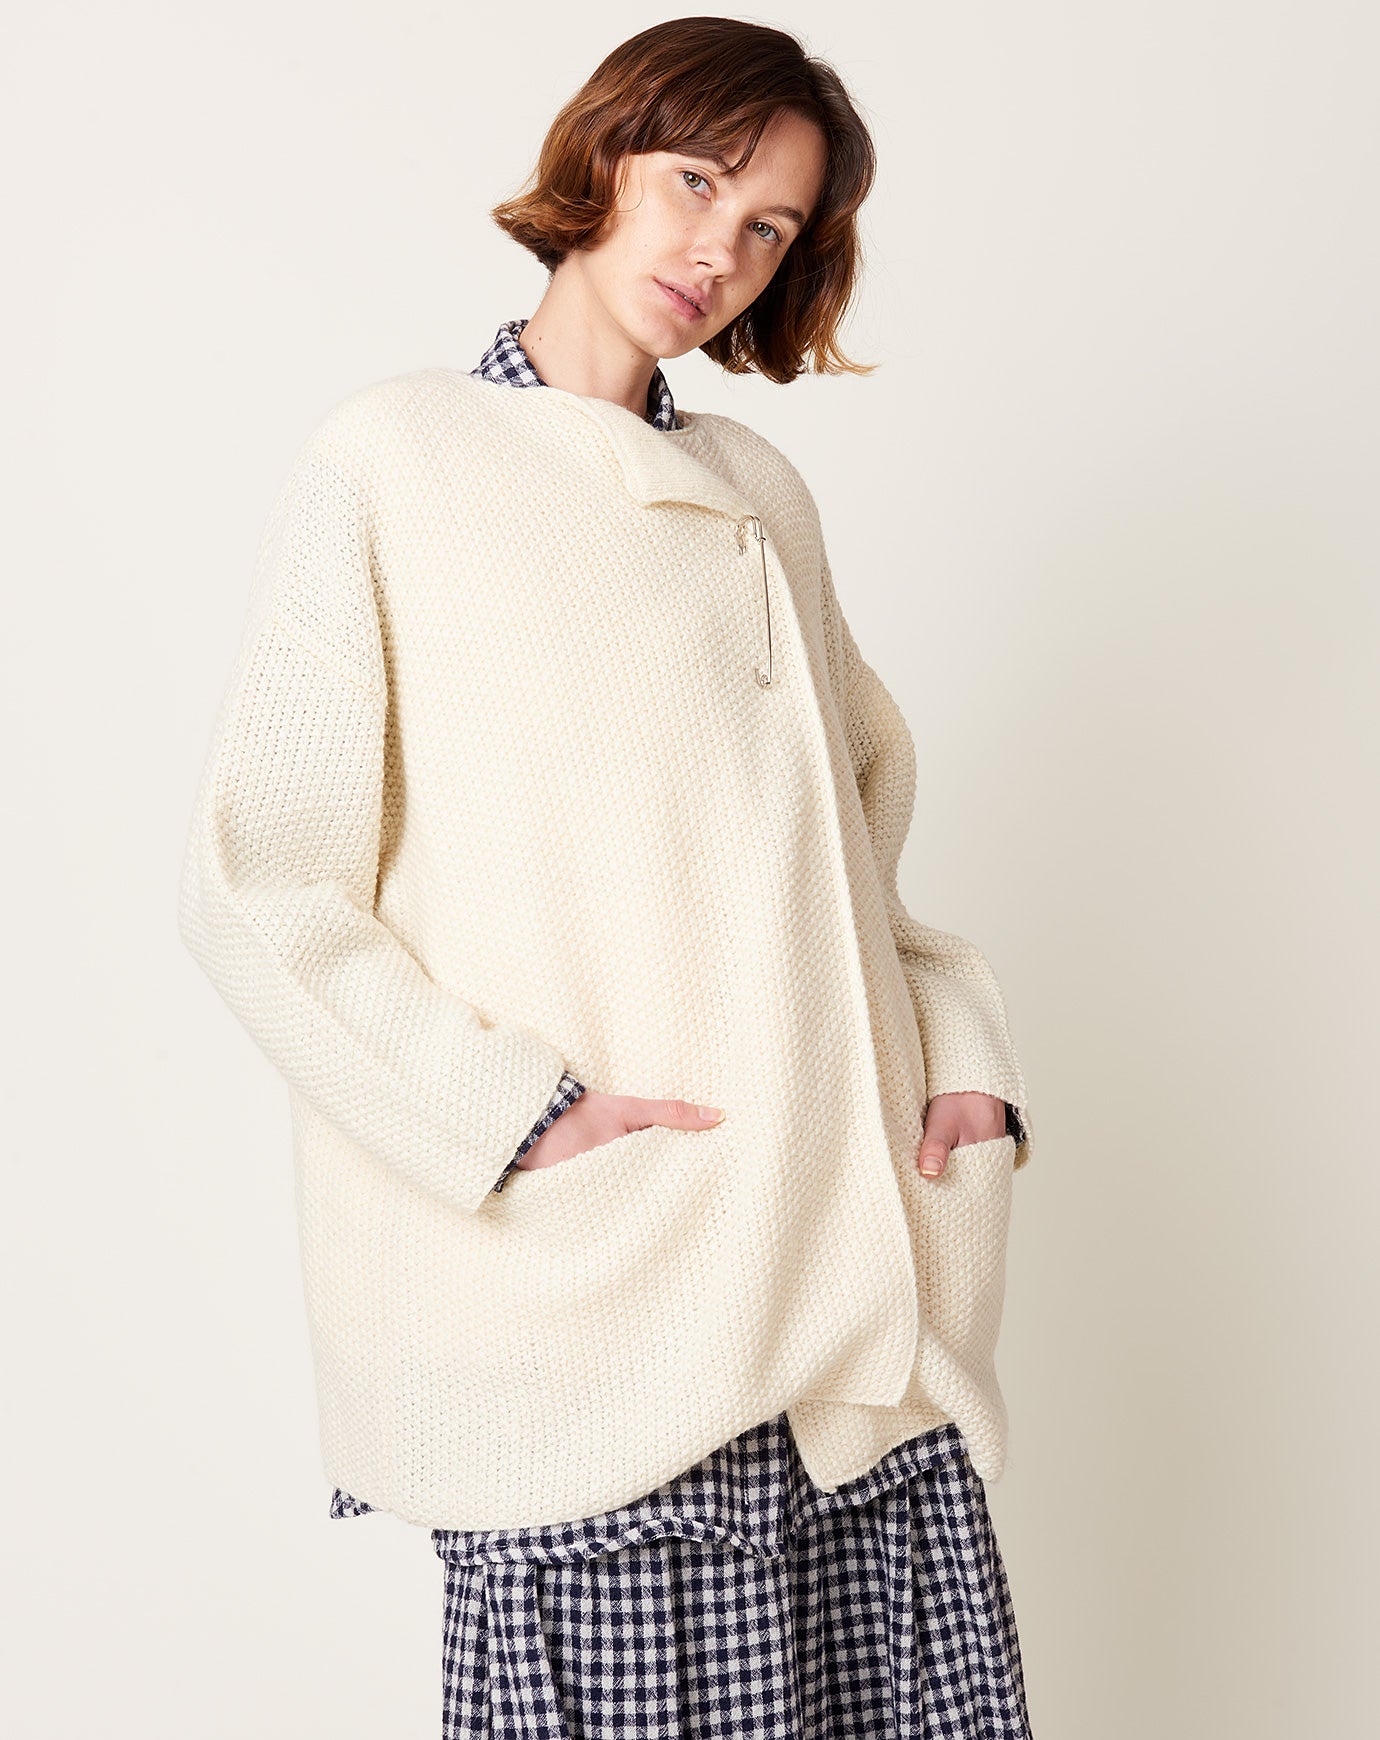 Ichi Cardigan with Removable Vest in Natural and White